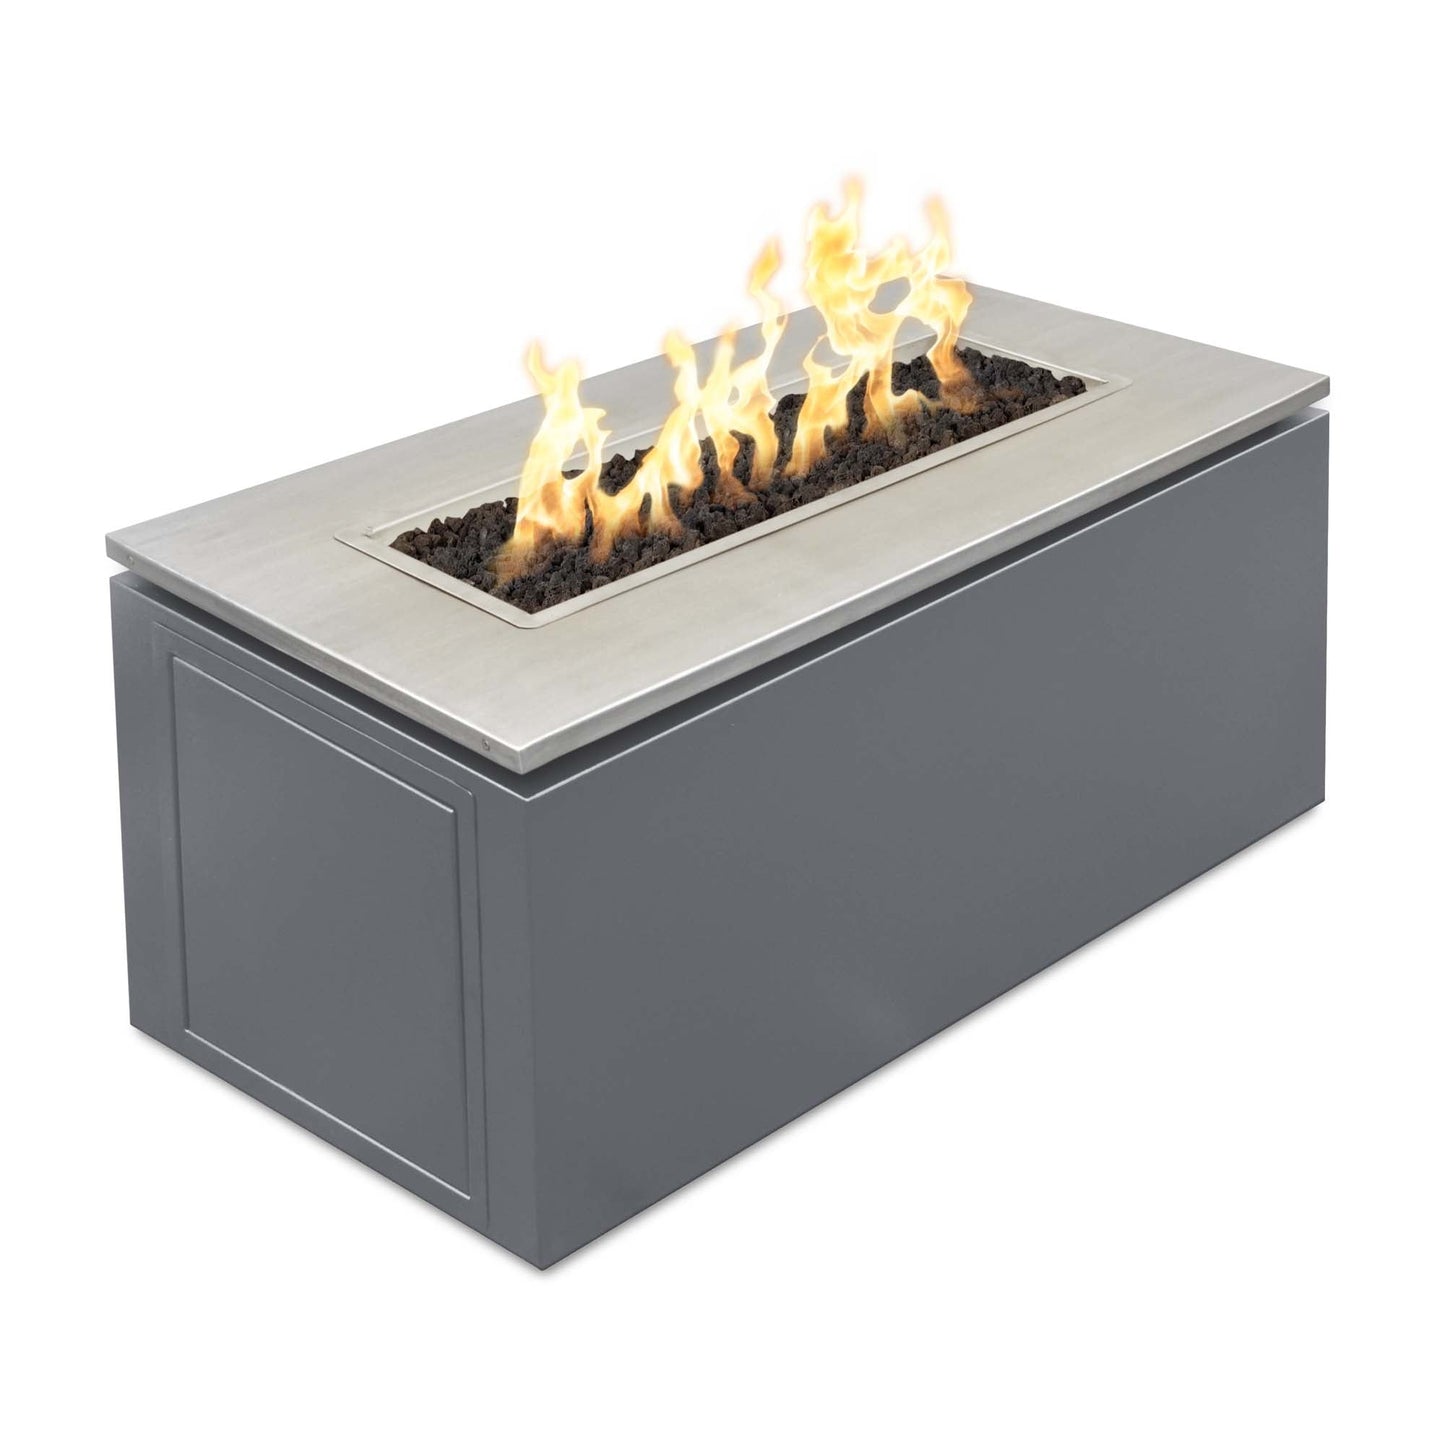 The Outdoor Plus Rectangular Merona 46" Hammered Copper Natural Gas Fire Pit with Match Lit with Flame Sense Ignition